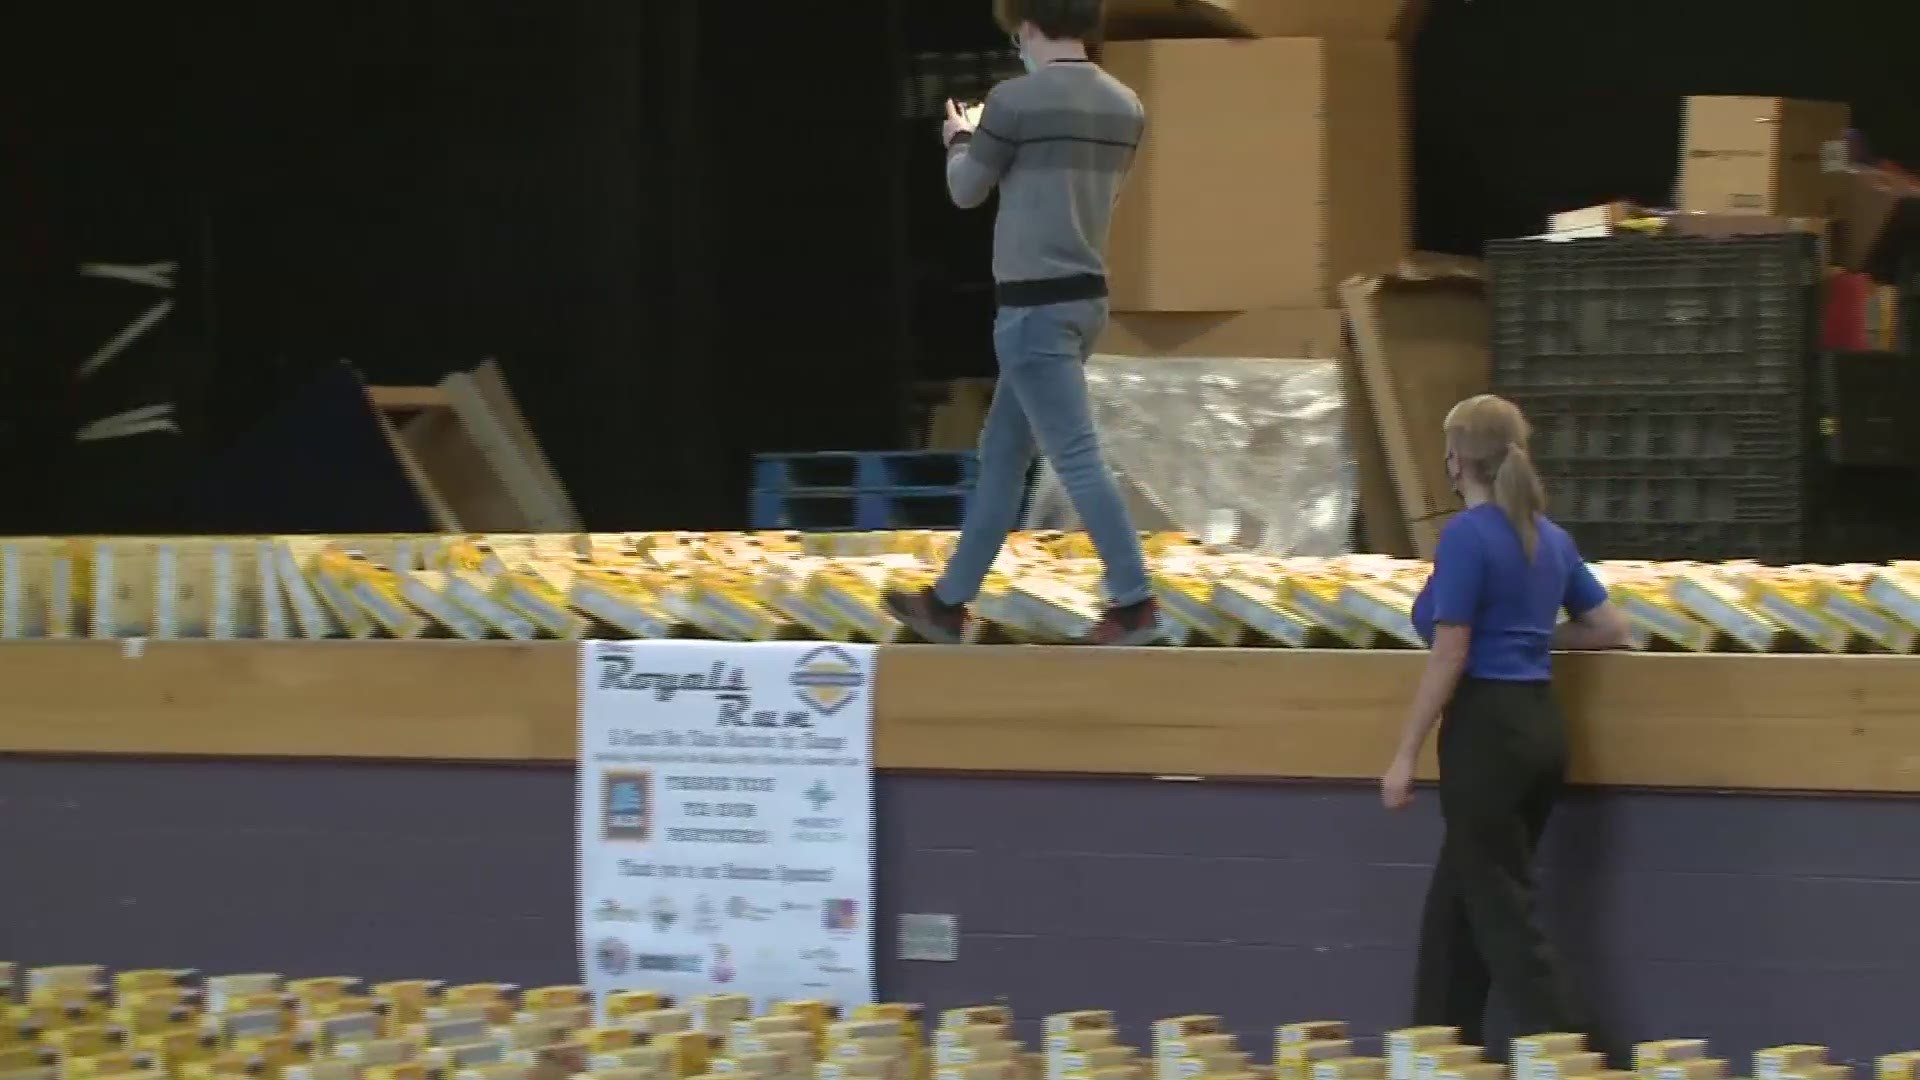 Lake Ridge Academy in North Ridgeville attempted to break a Guinness World Record for the most cereal boxes toppled in a domino fashion Wednesday.